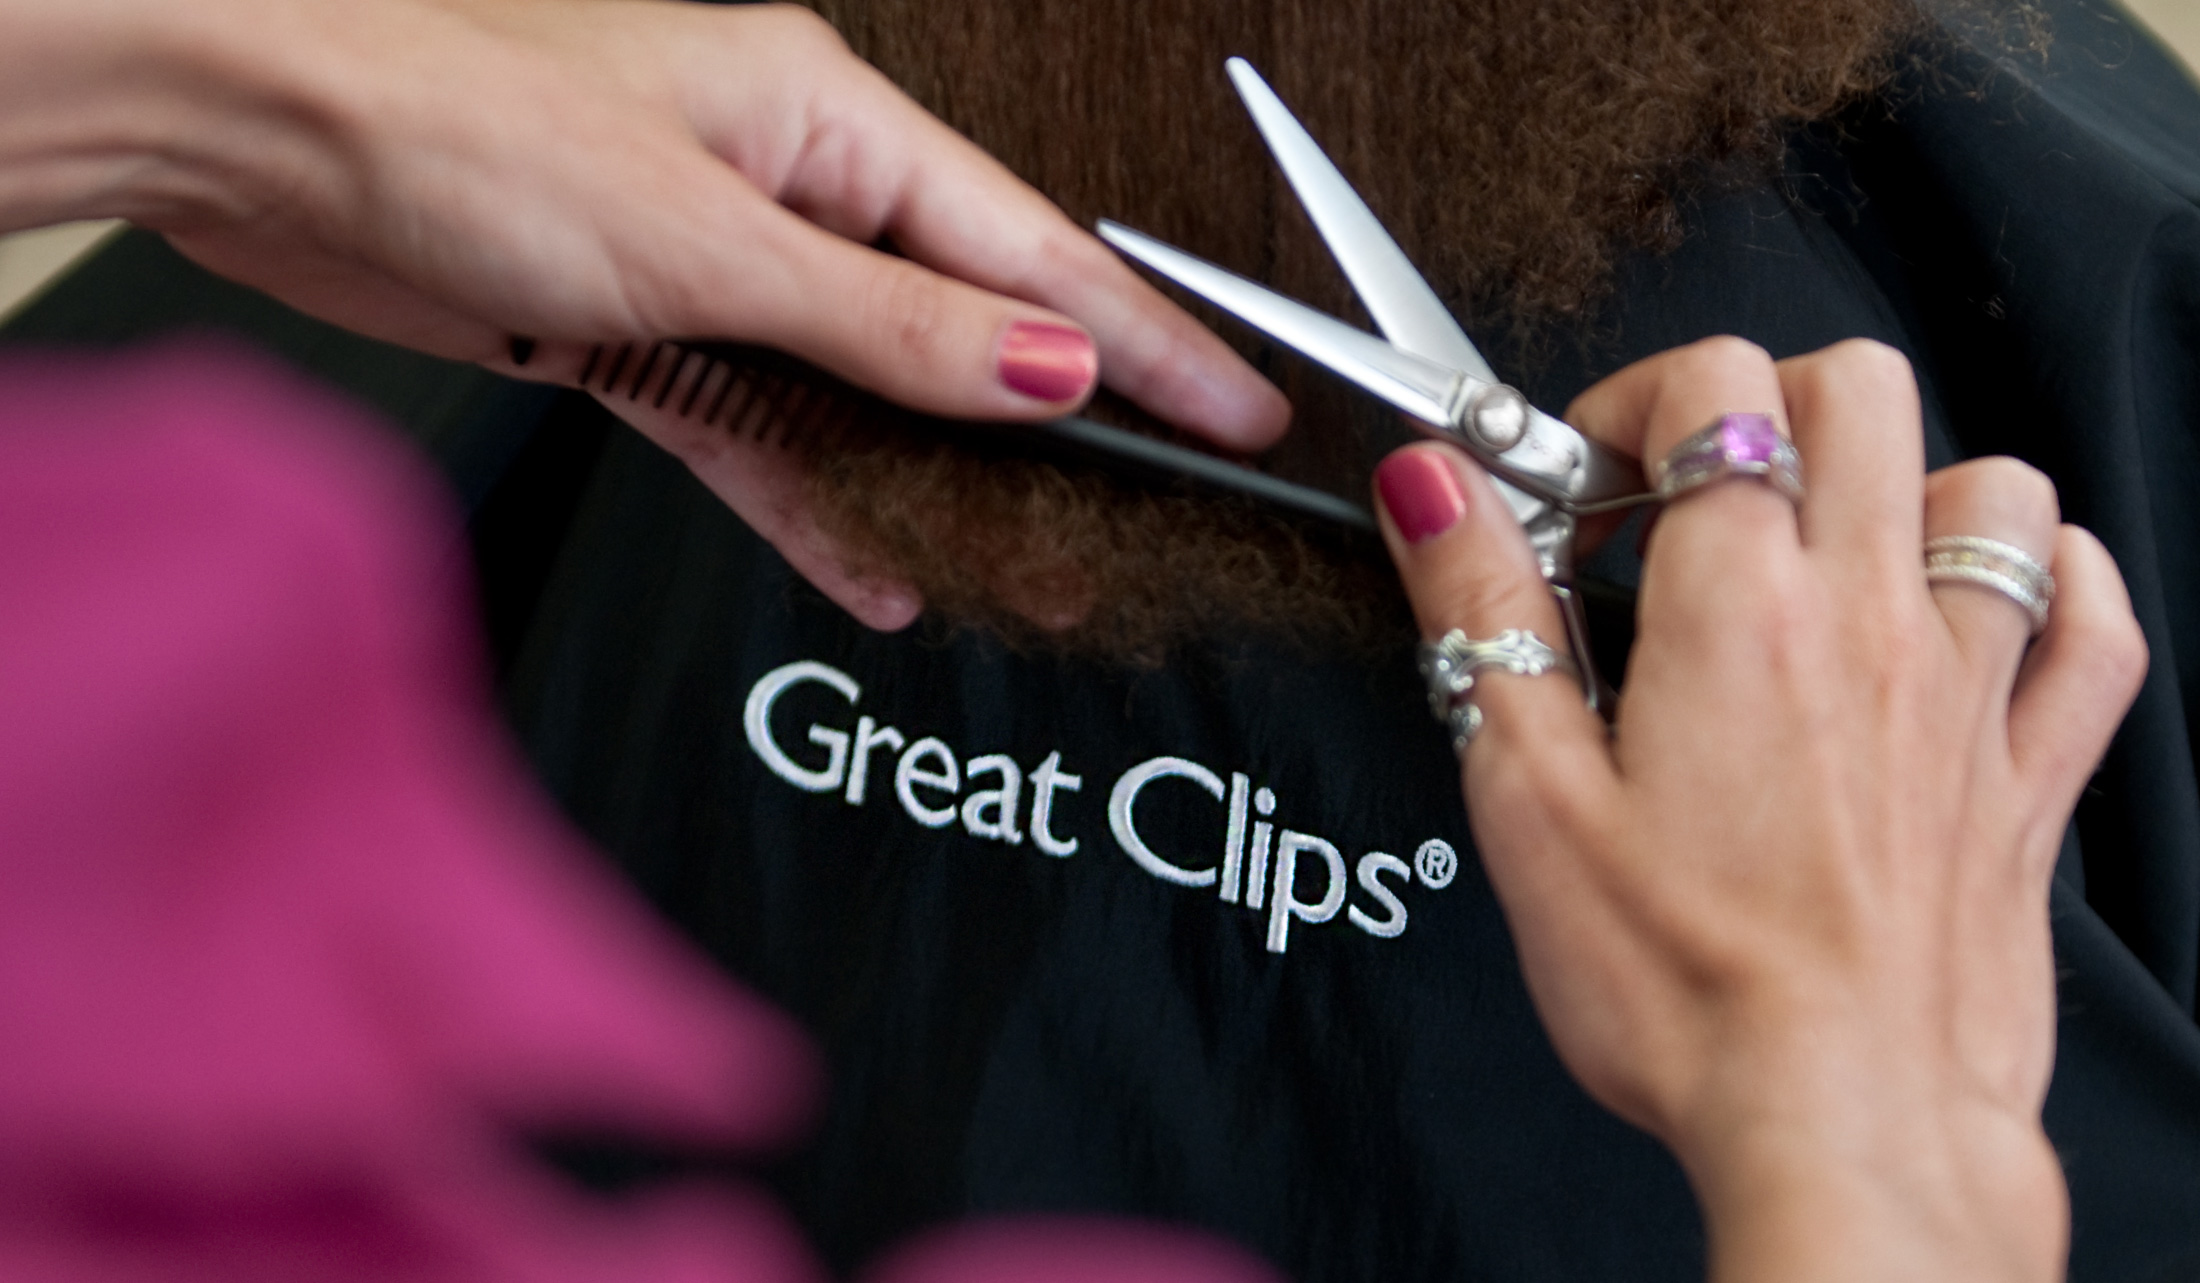 Over the shoulder photo of a Great Clips logo through the hands of a stylist